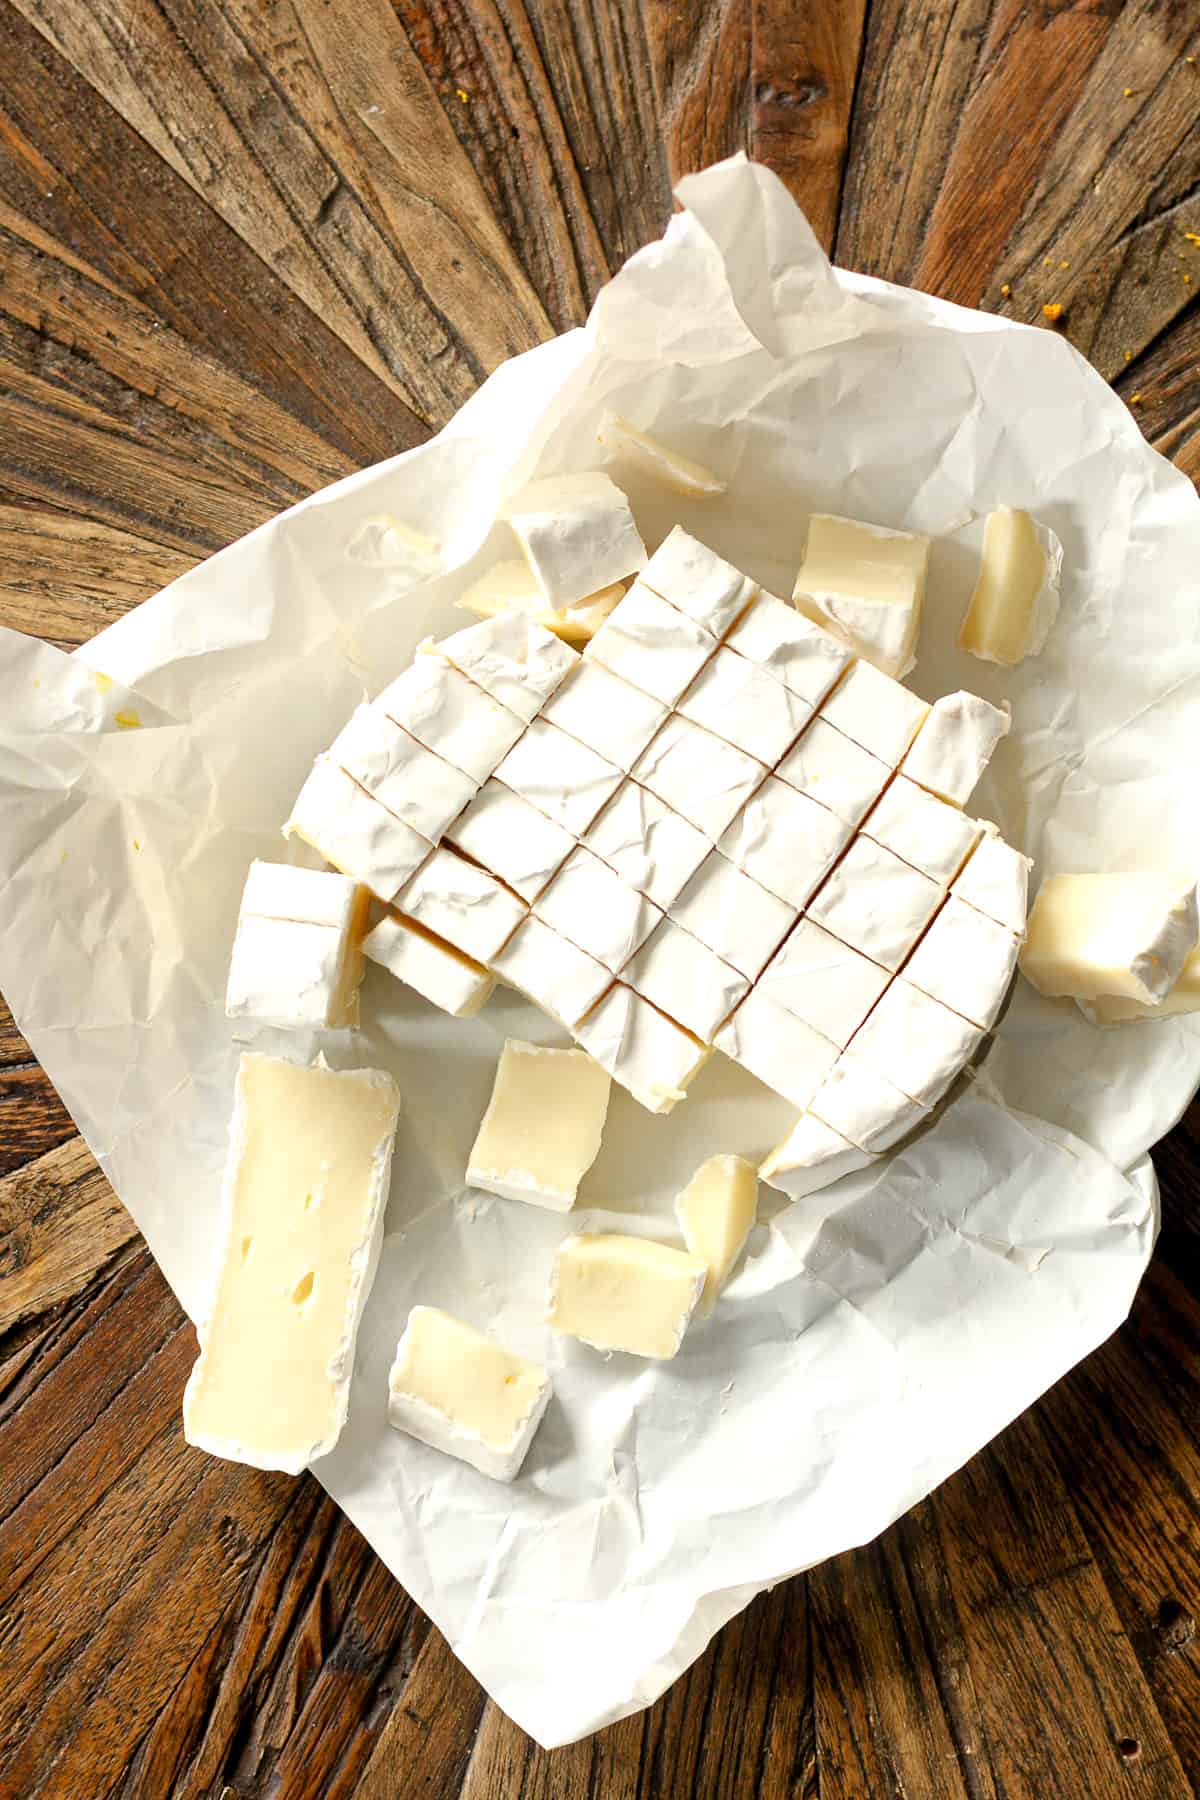 The cubed brie cheese.